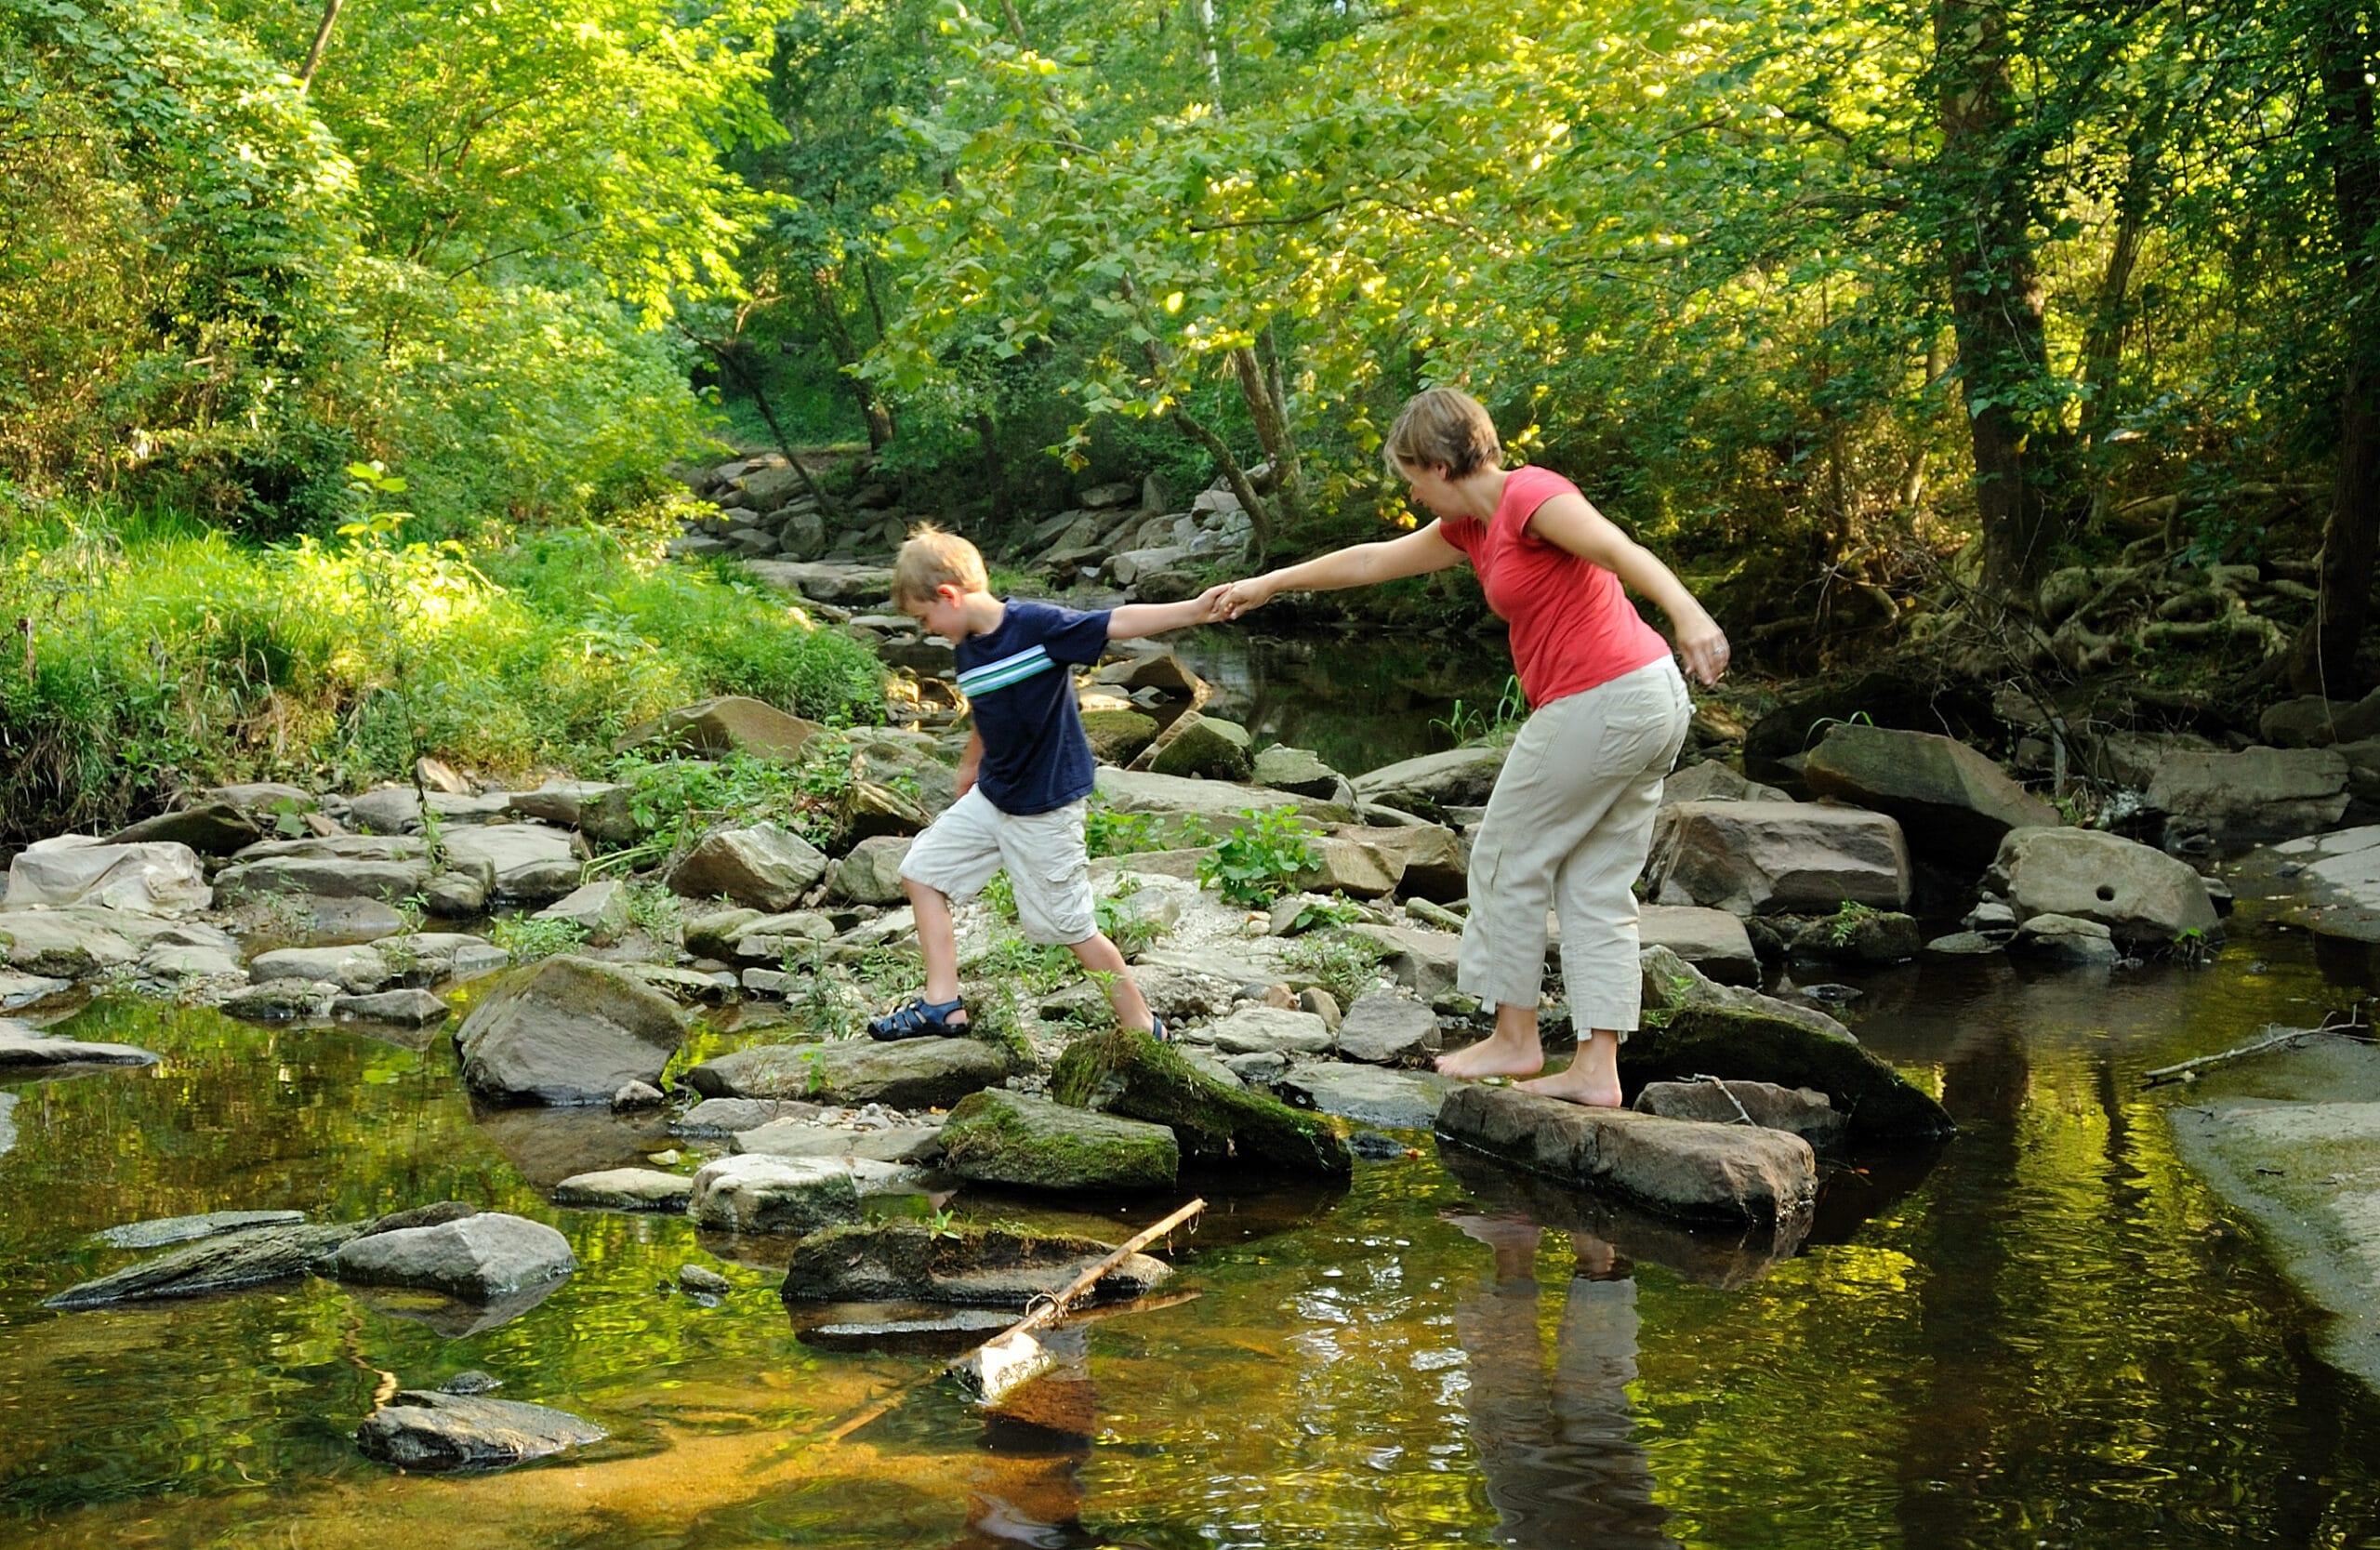 A woman and child standing on rocks in a stream.